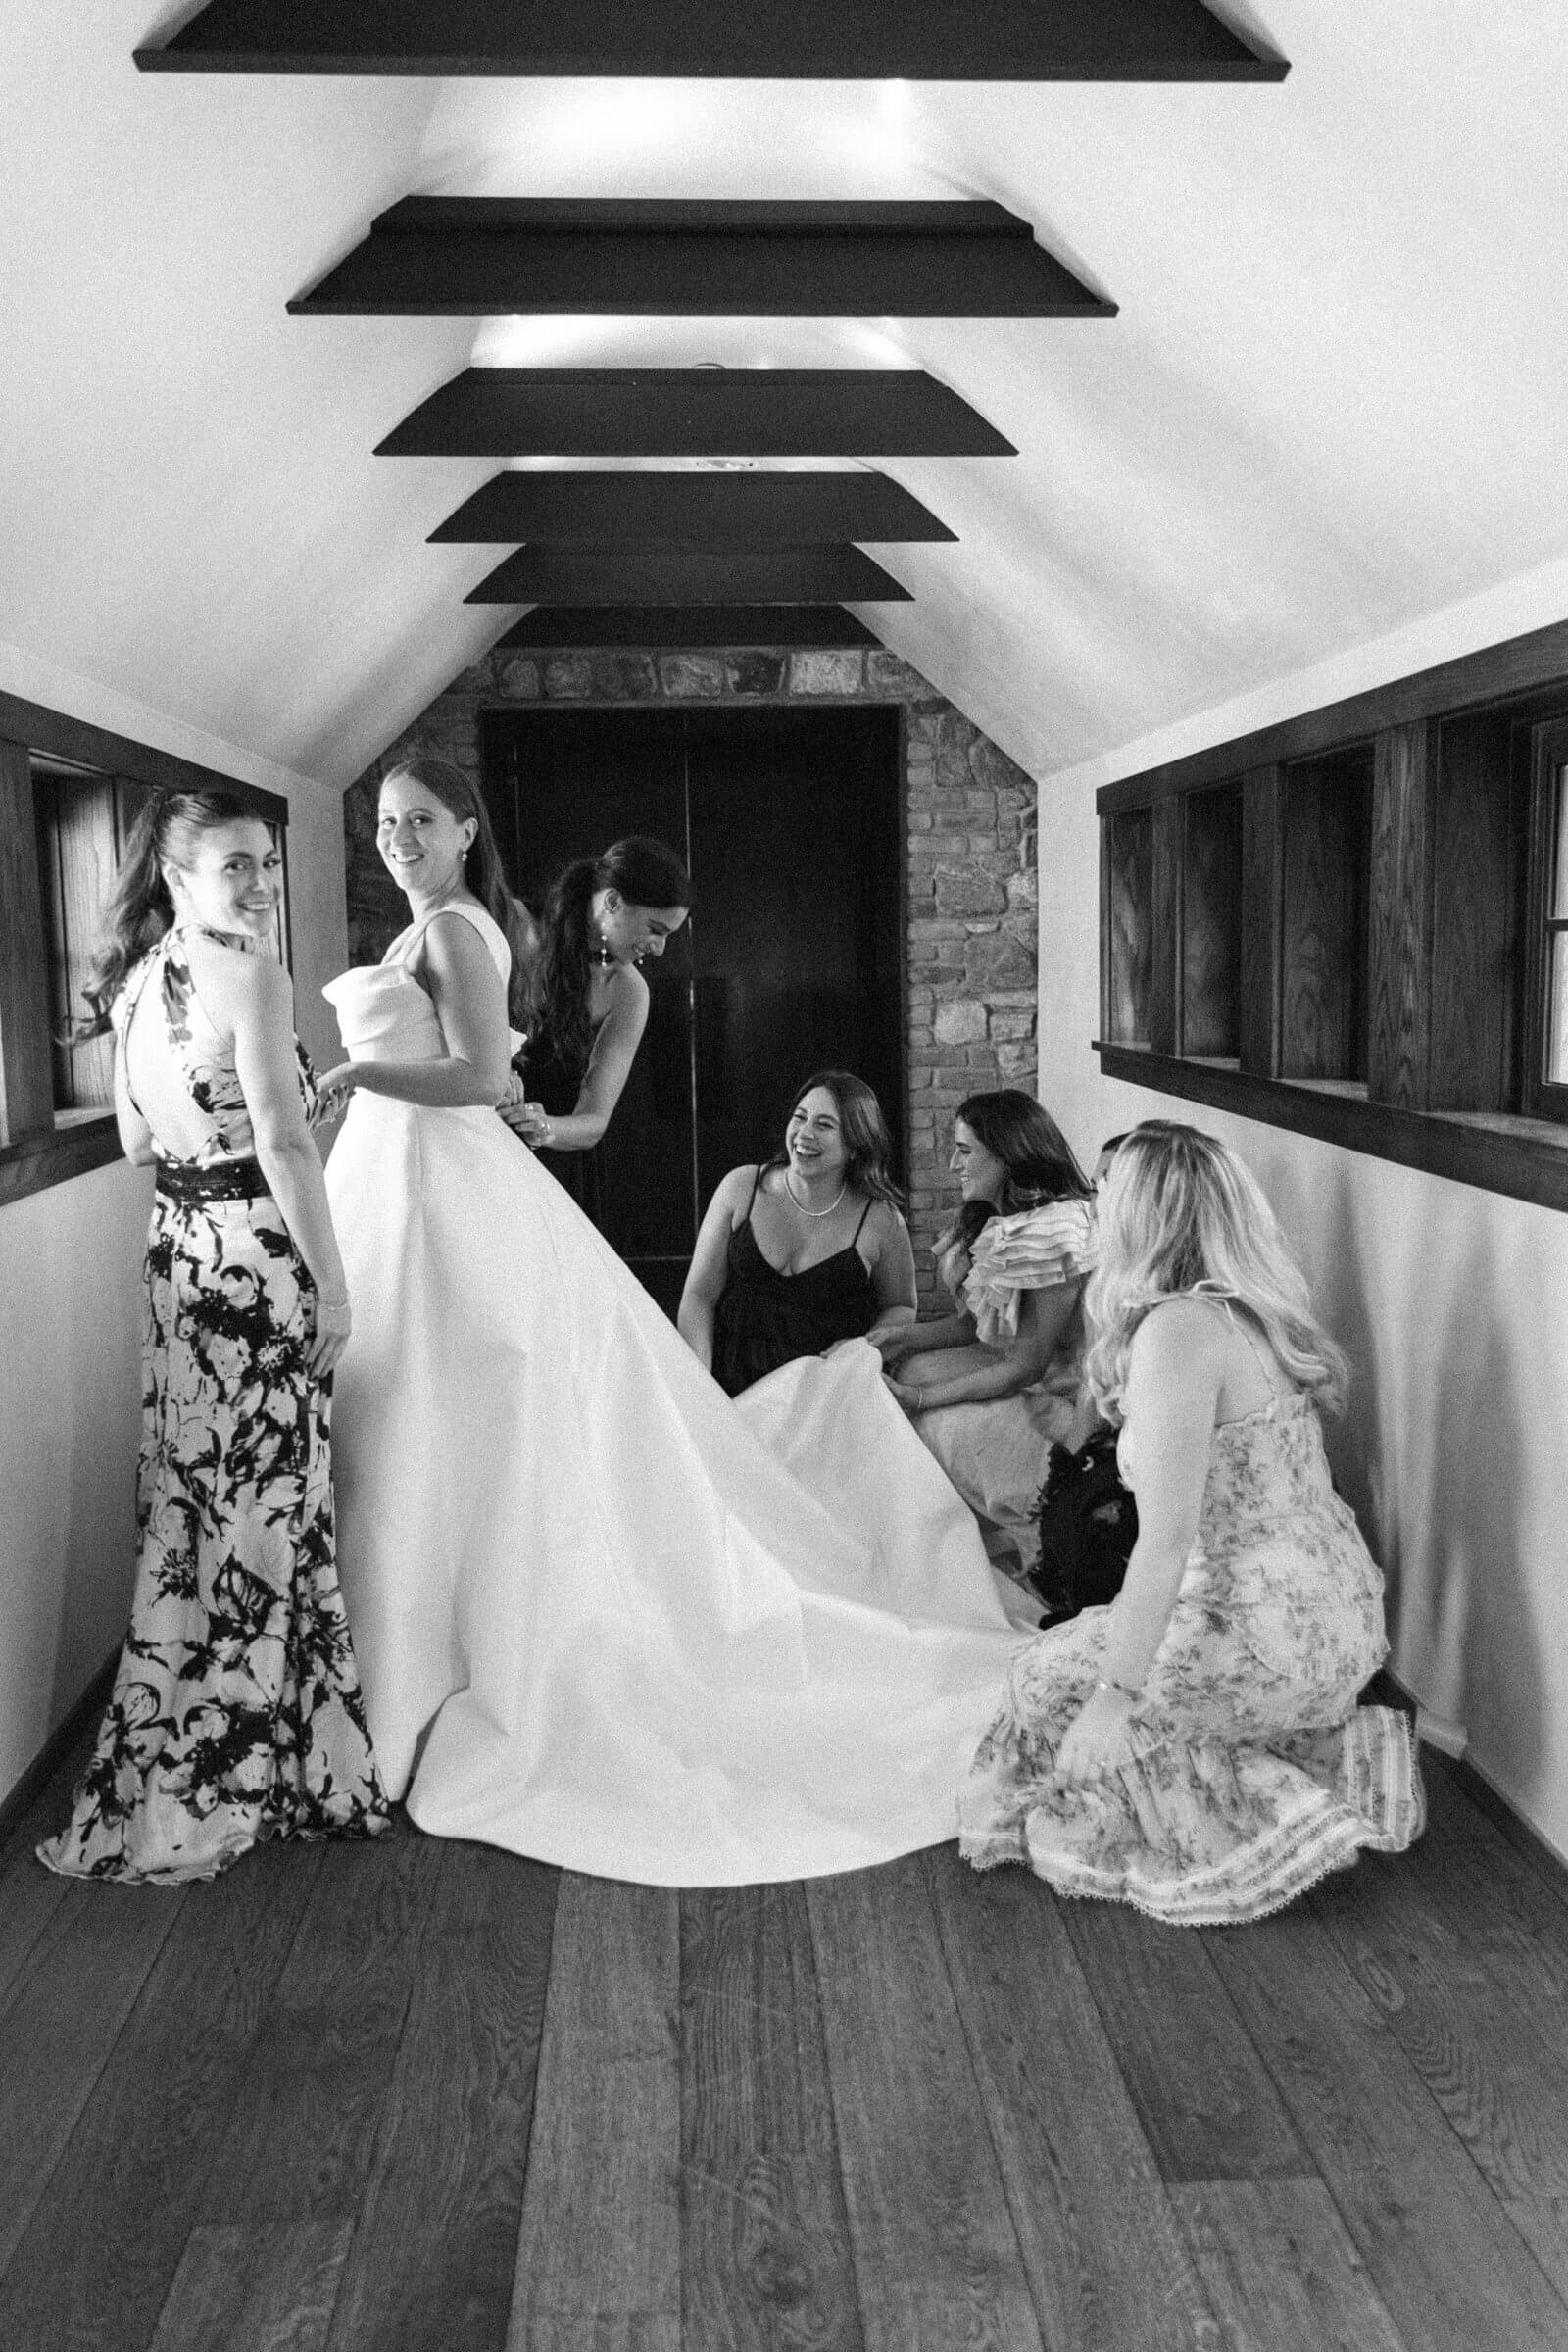 Bride in a stunning white dress surrounded by bridesmaids in an attic space, preparing for the ceremony.